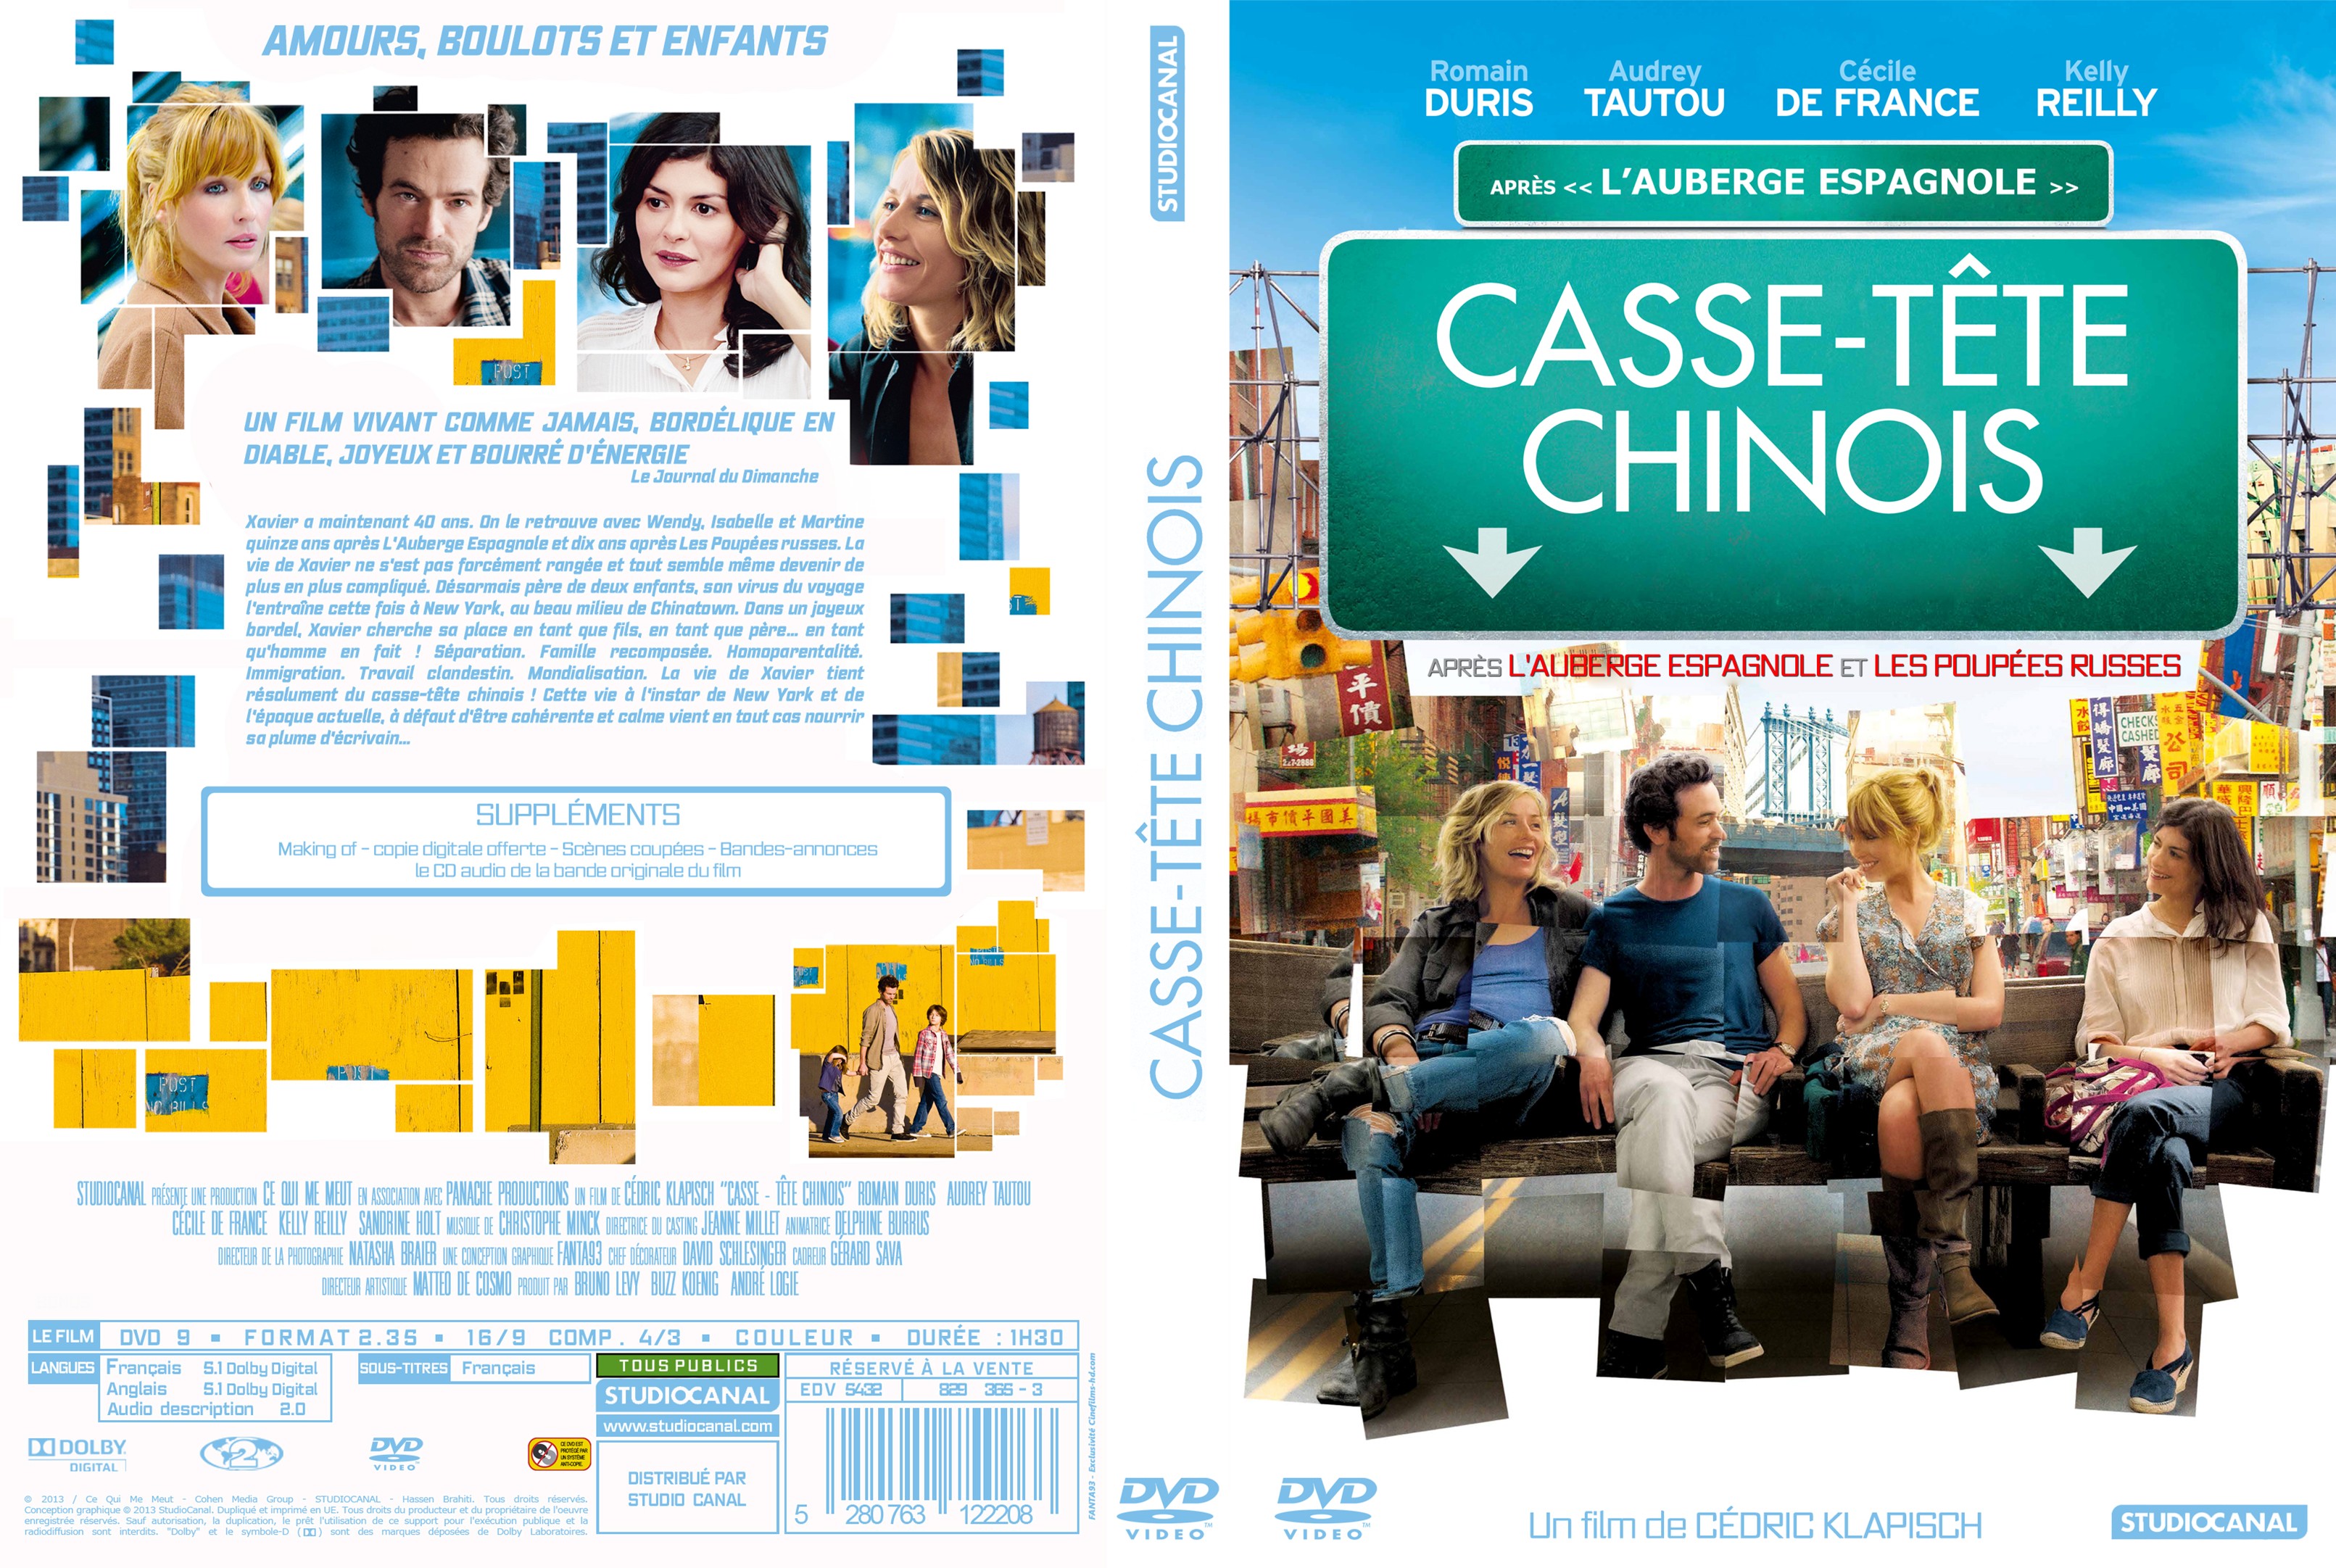 Jaquette DVD Casse-tte chinois